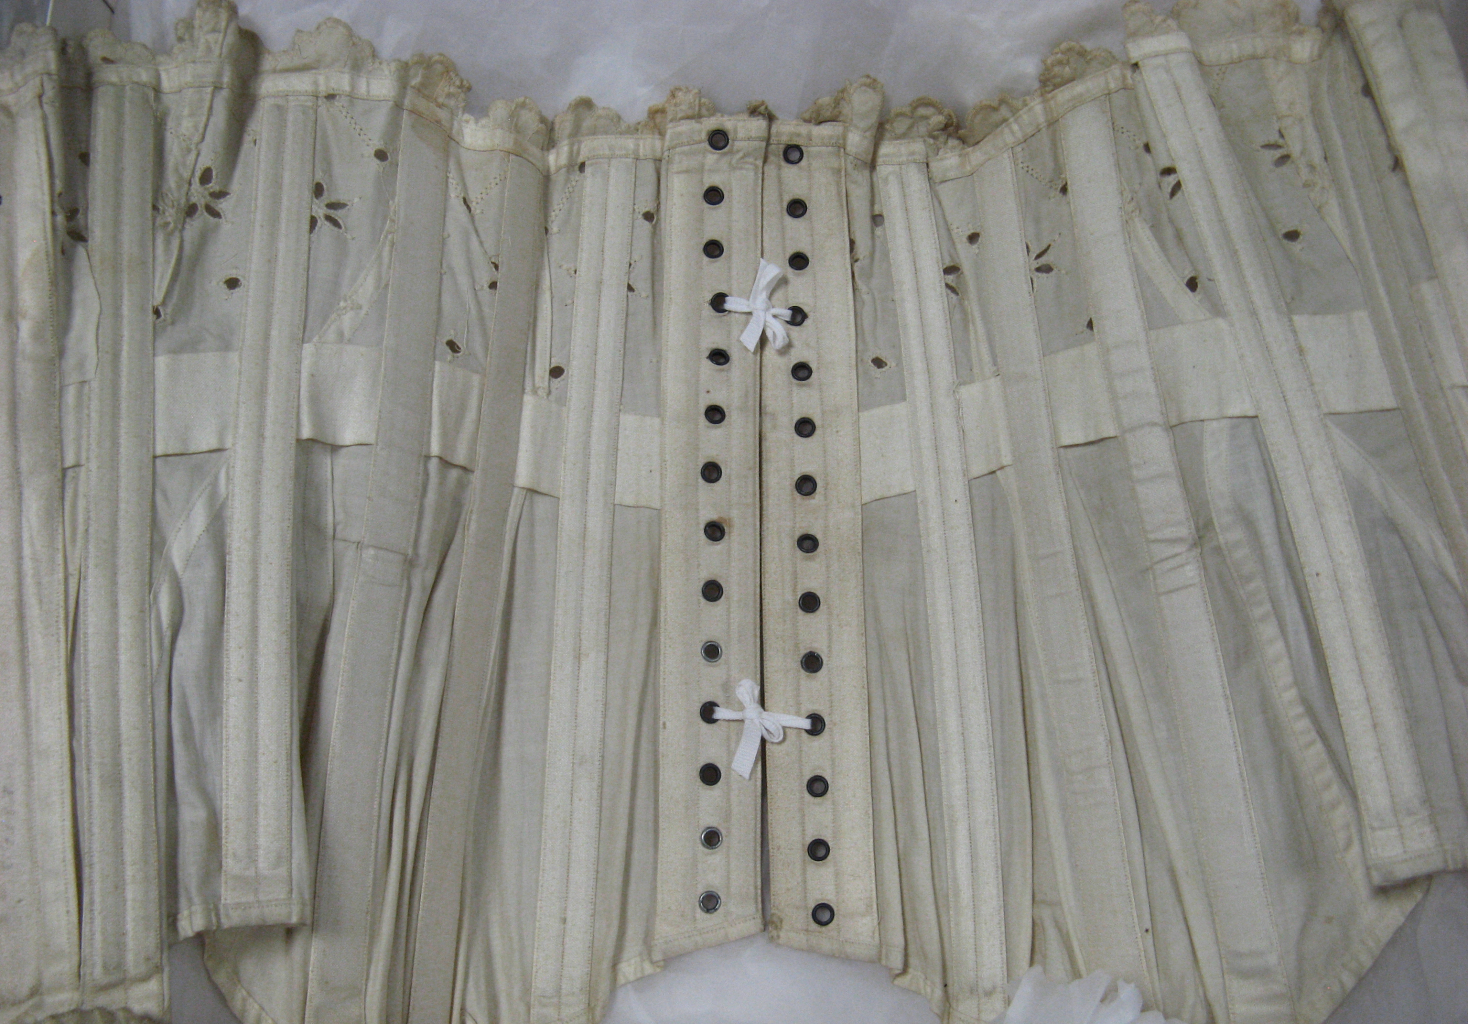 1905 Tropical lawn corset. Photo by Morúa. Used with permission of Leicestershire County Council Museum Services, Symington Collection